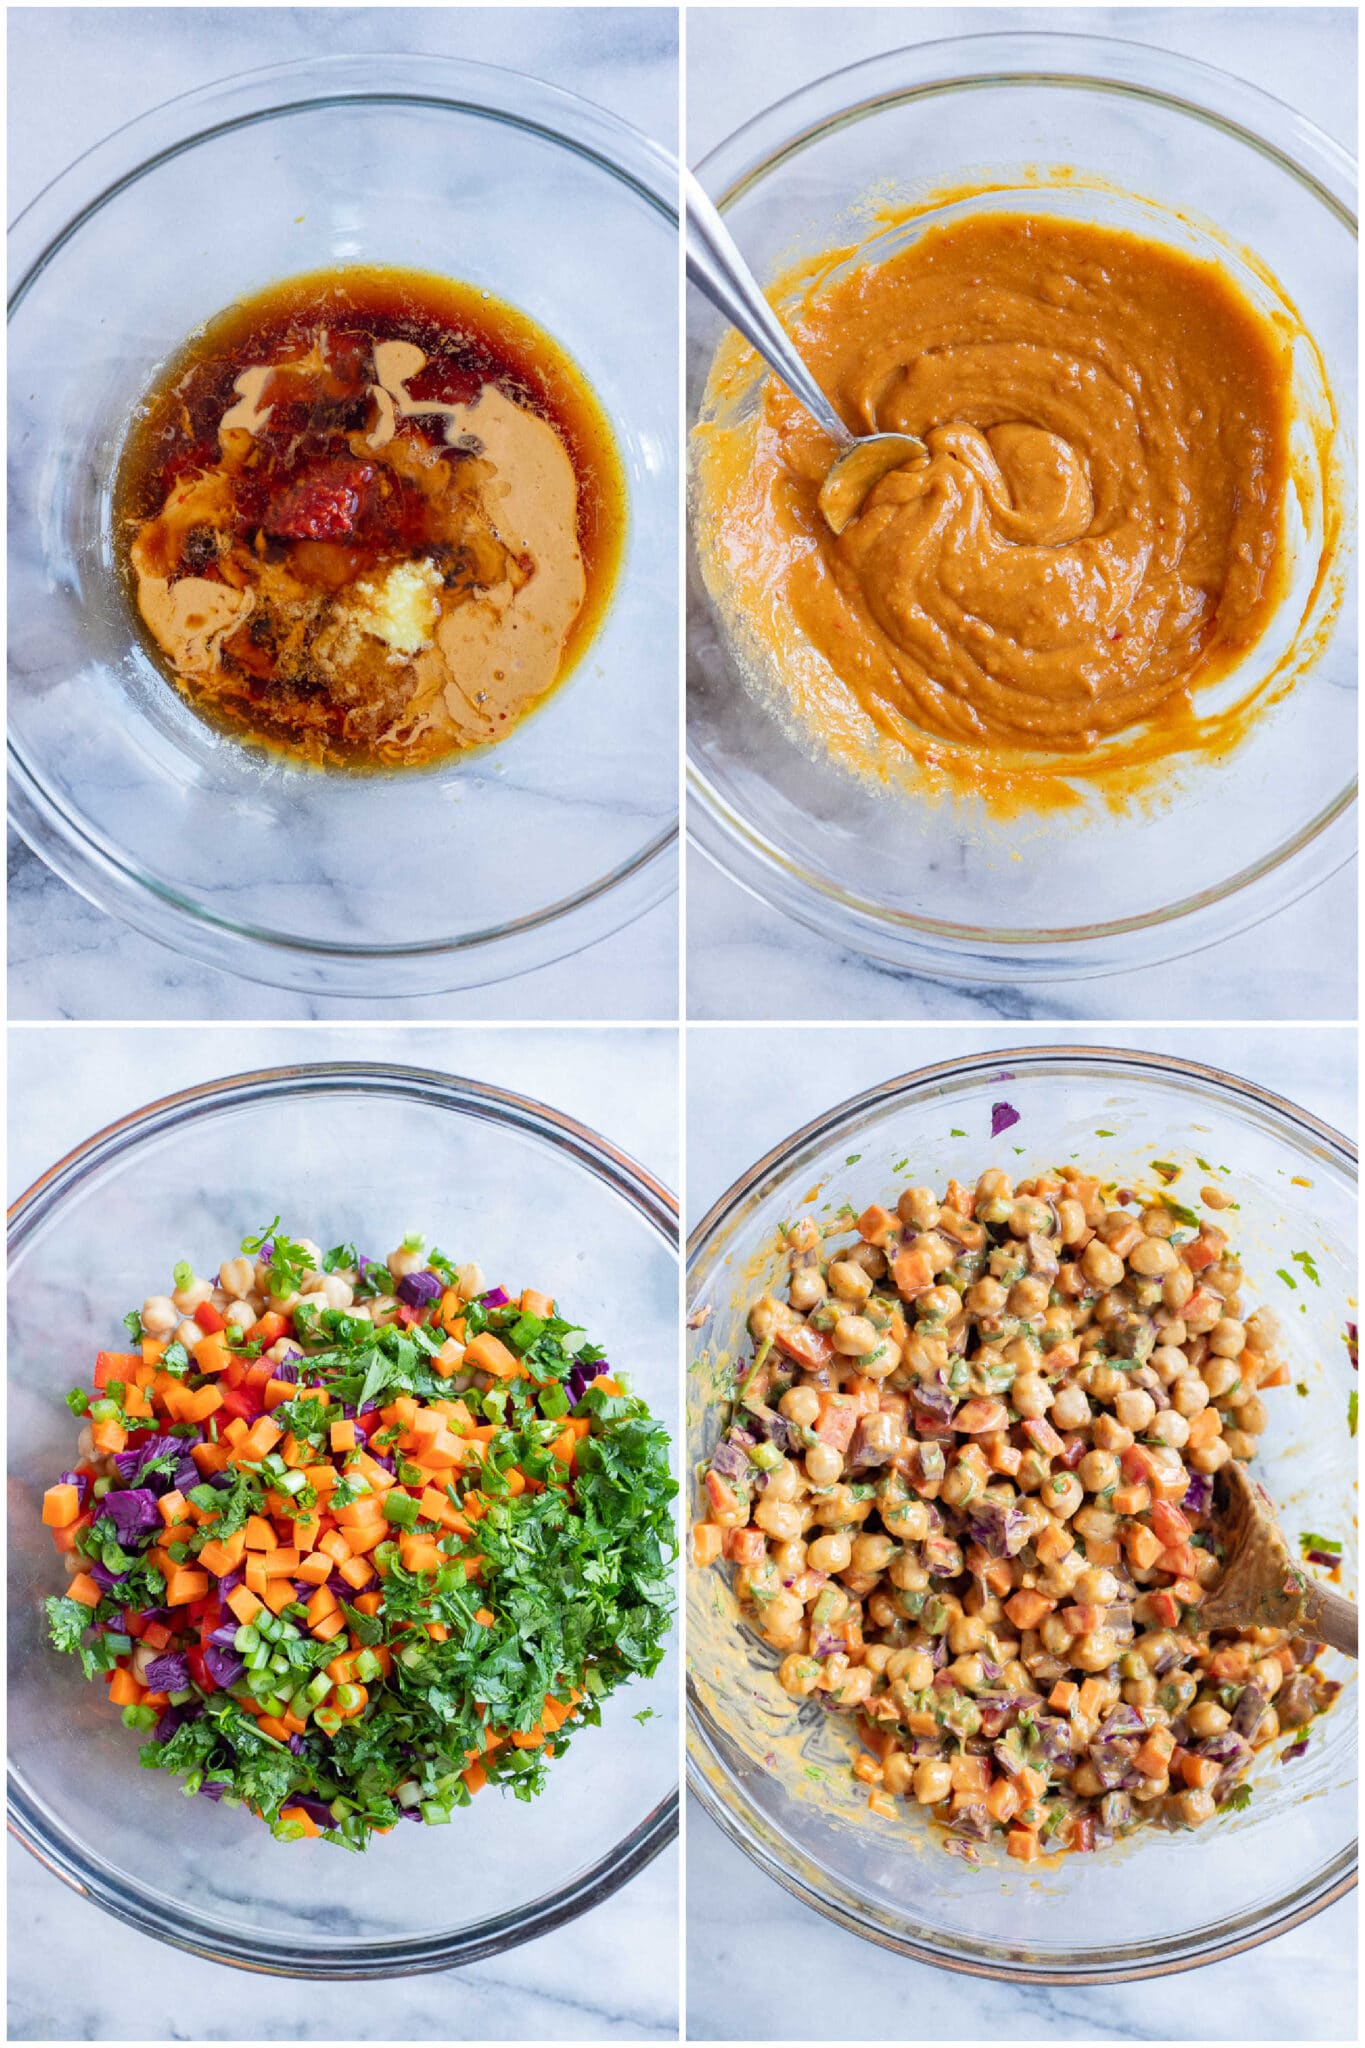 showing how to make the peanut sauce and Asian inspired chickpea salad